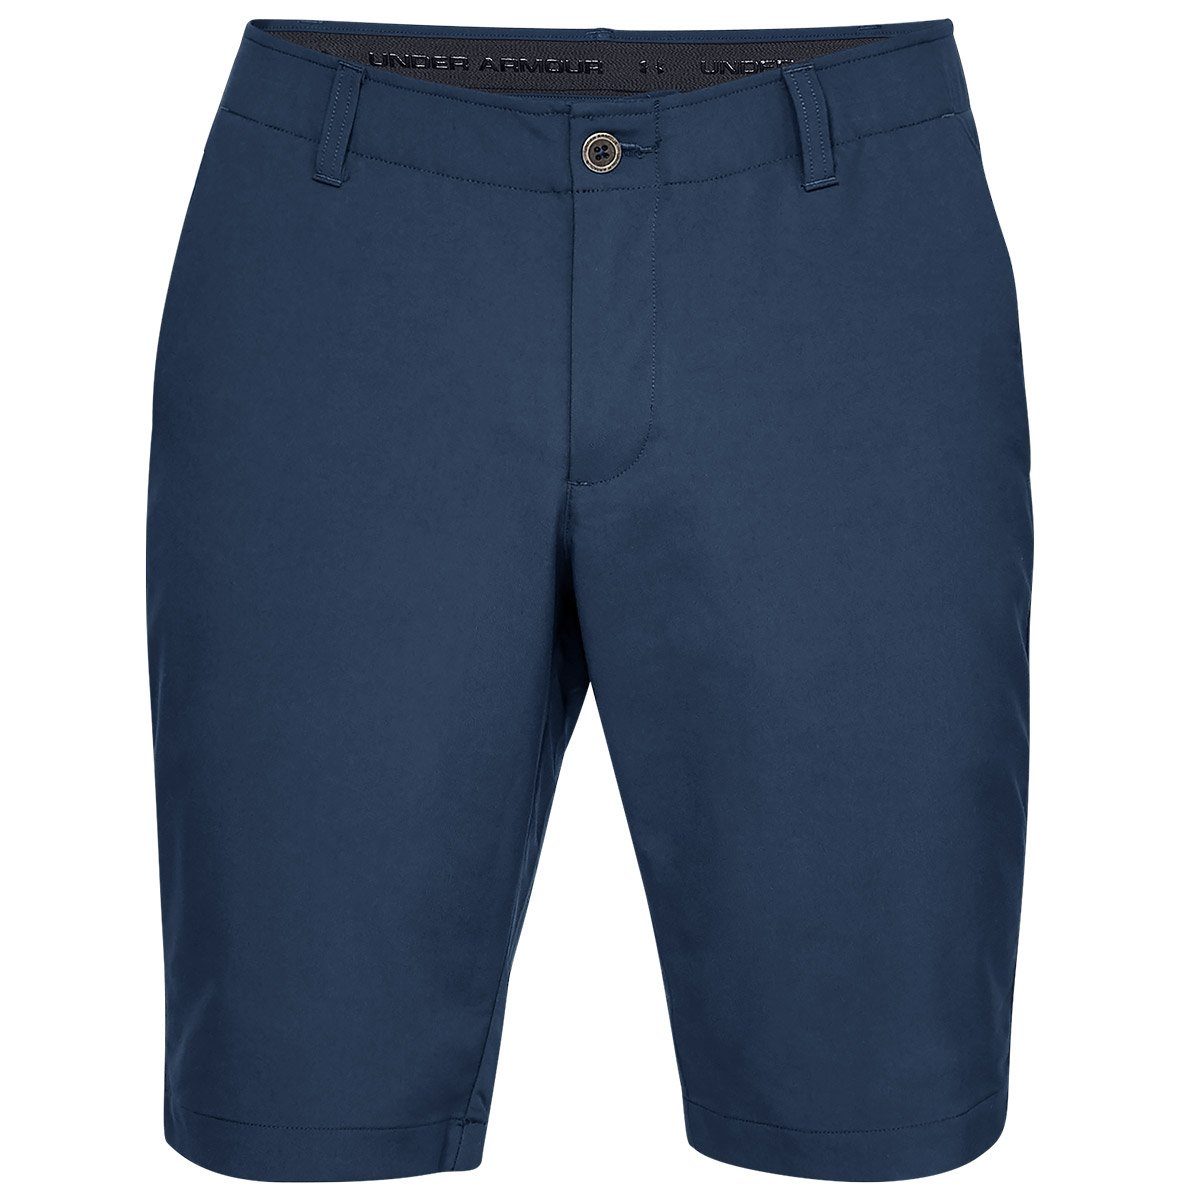 Under Armour® Golfshorts Under Armour Performance Taper Shorts Navy